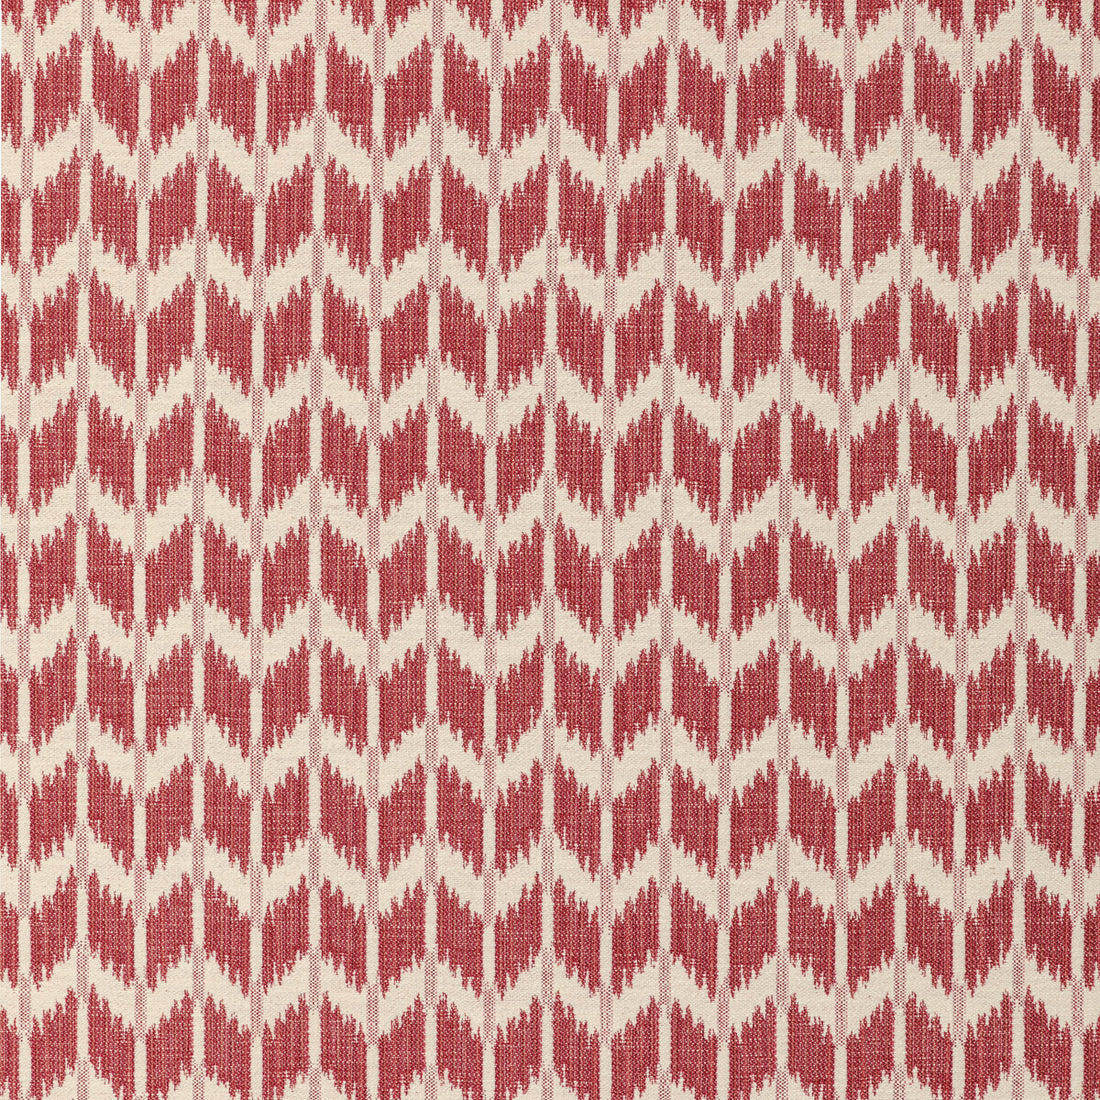 Lorient Weave fabric in berry color - pattern 8022111.197.0 - by Brunschwig &amp; Fils in the Lorient Weaves collection